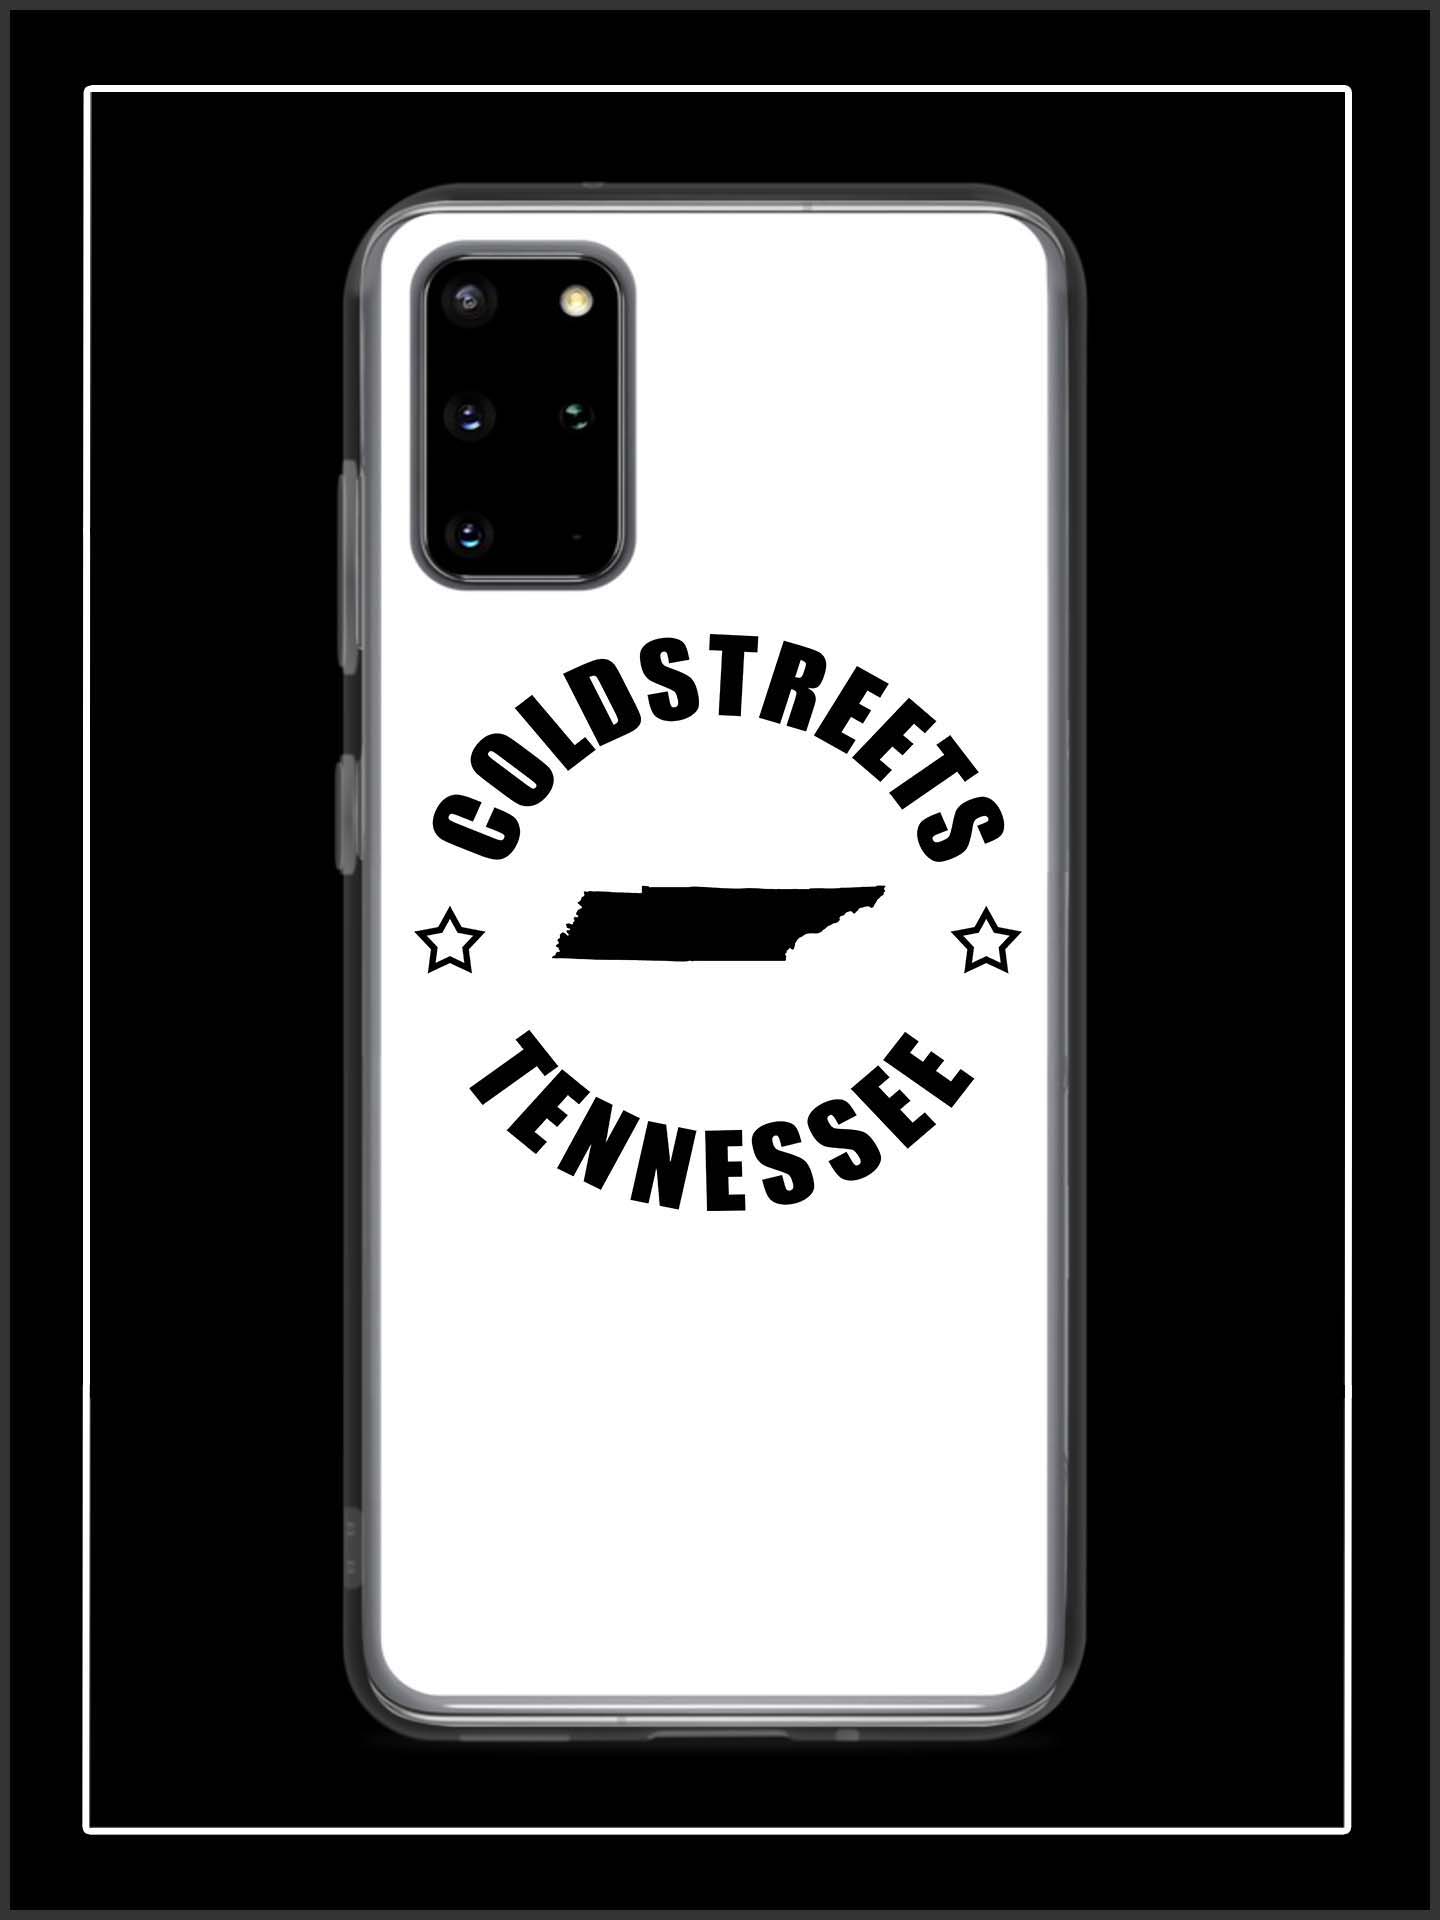 Cold Streets Tennessee Samsung Cases